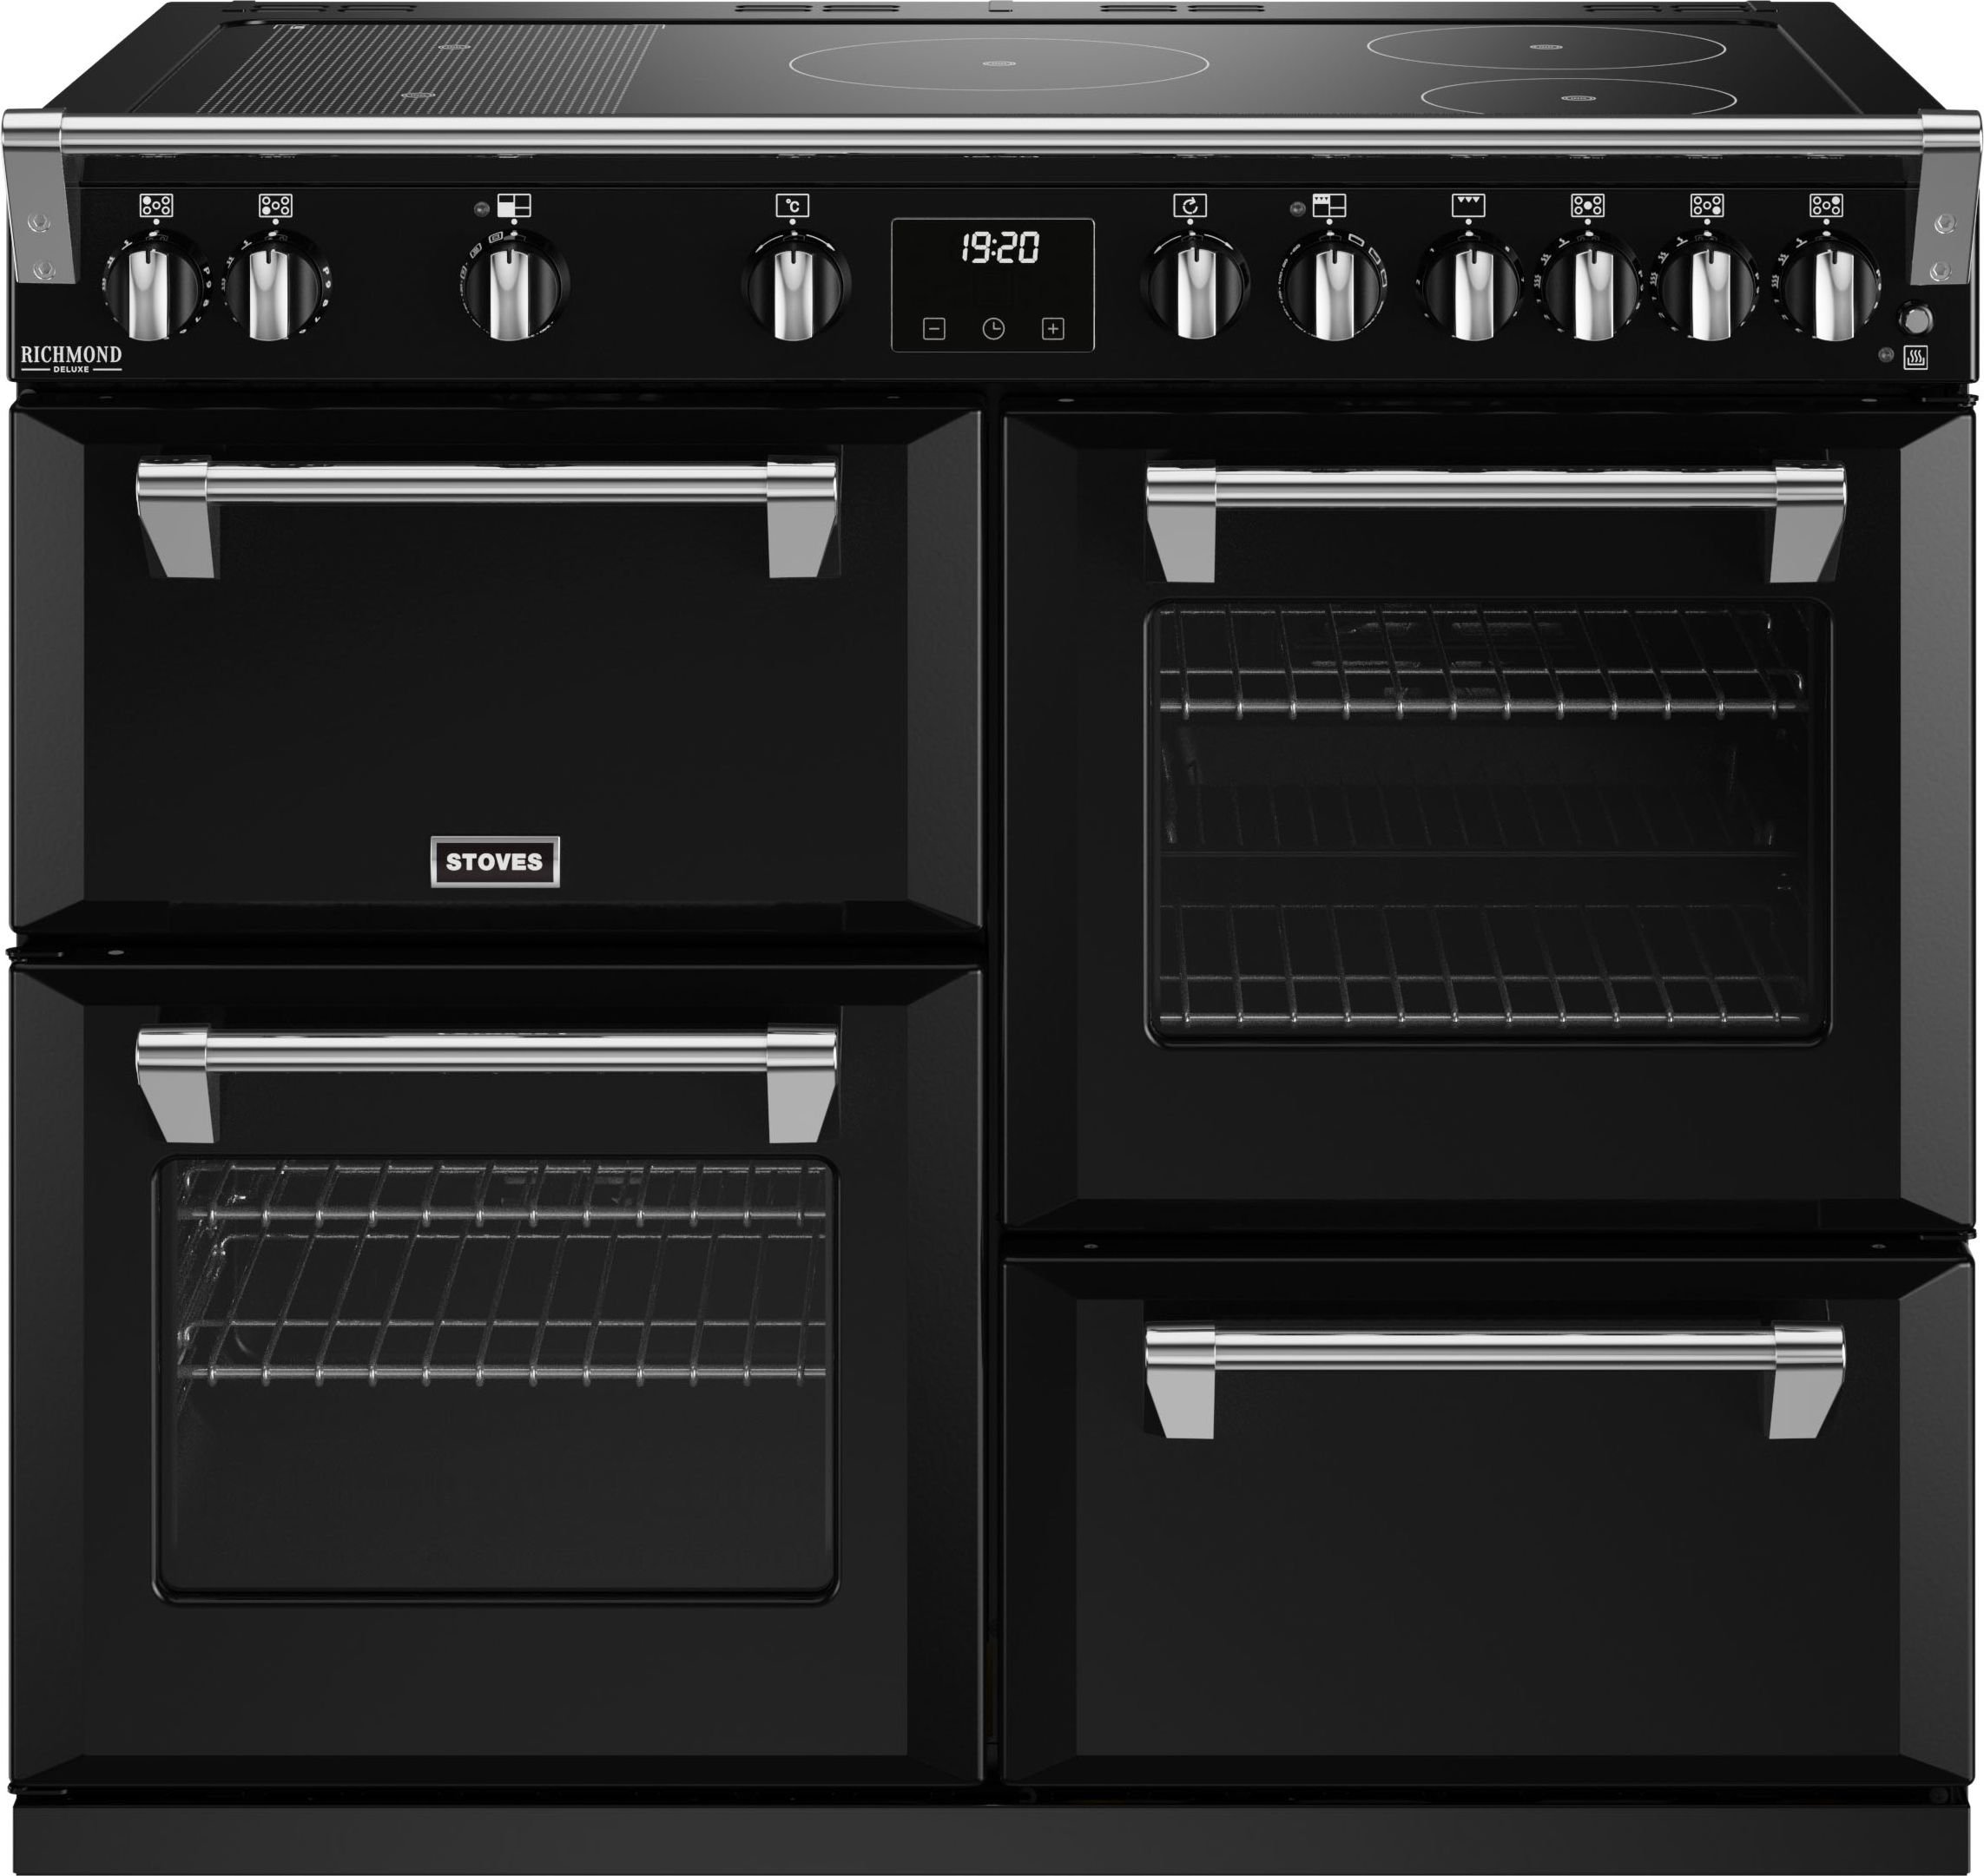 Stoves Richmond Deluxe ST DX RICH D1000Ei RTY BK 100cm Electric Range Cooker with Induction Hob - Black - A Rated, Black